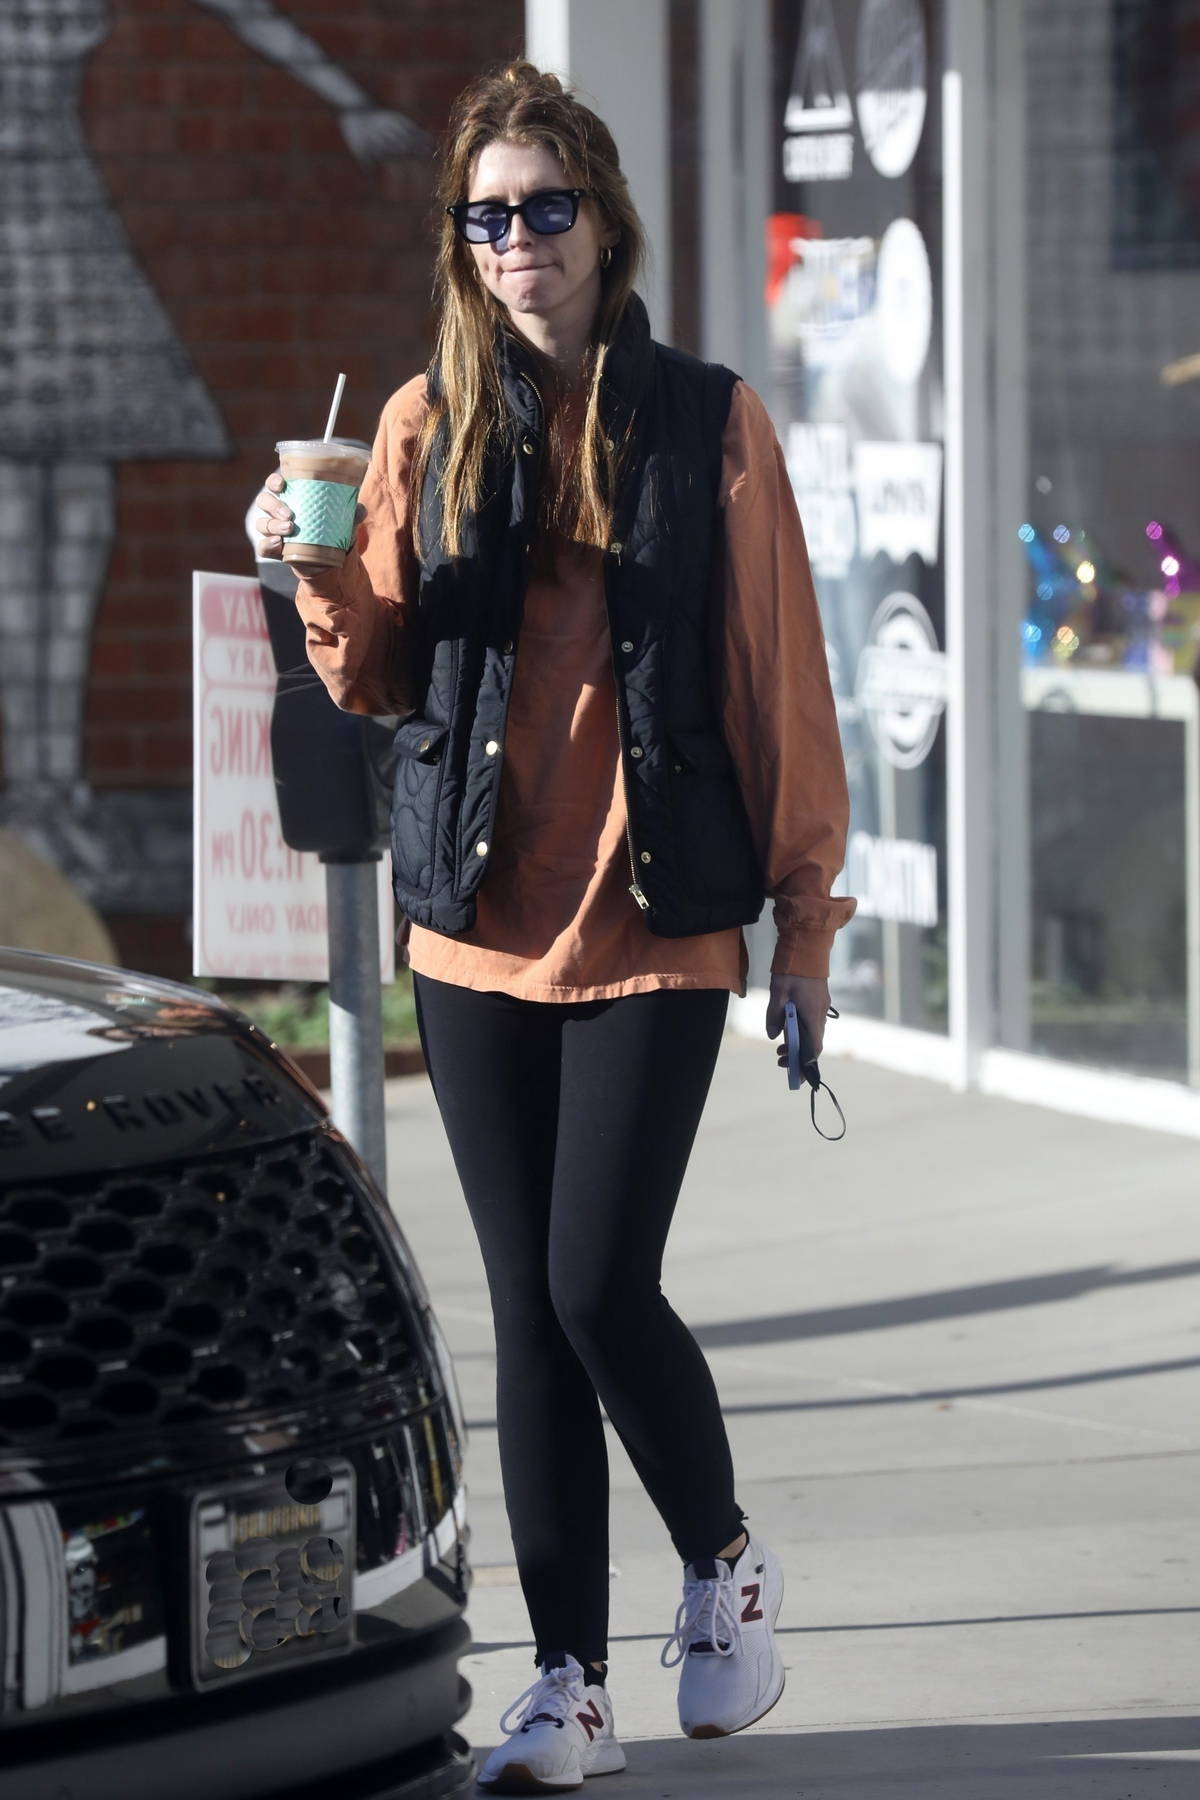 Katherine Schwarzenegger steps out in jeans for a coffee run with